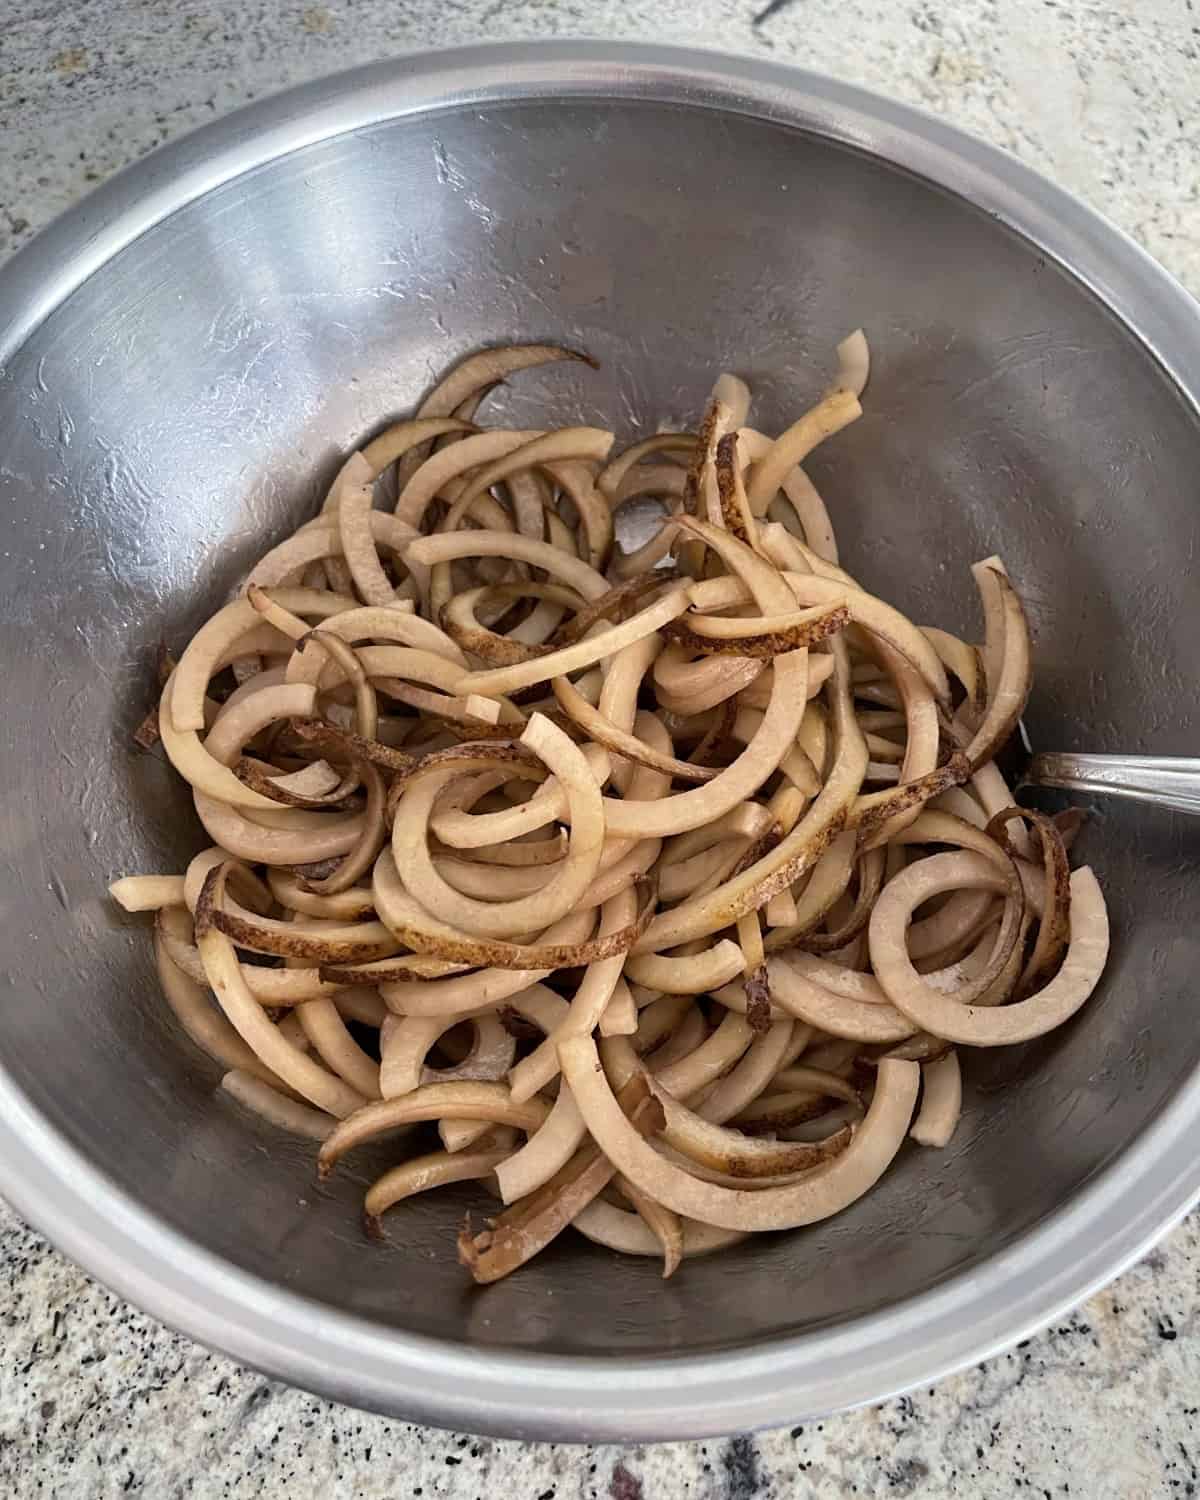 Raw uncooked curly potato spirals in mixing bowl with avocado oil and salt.